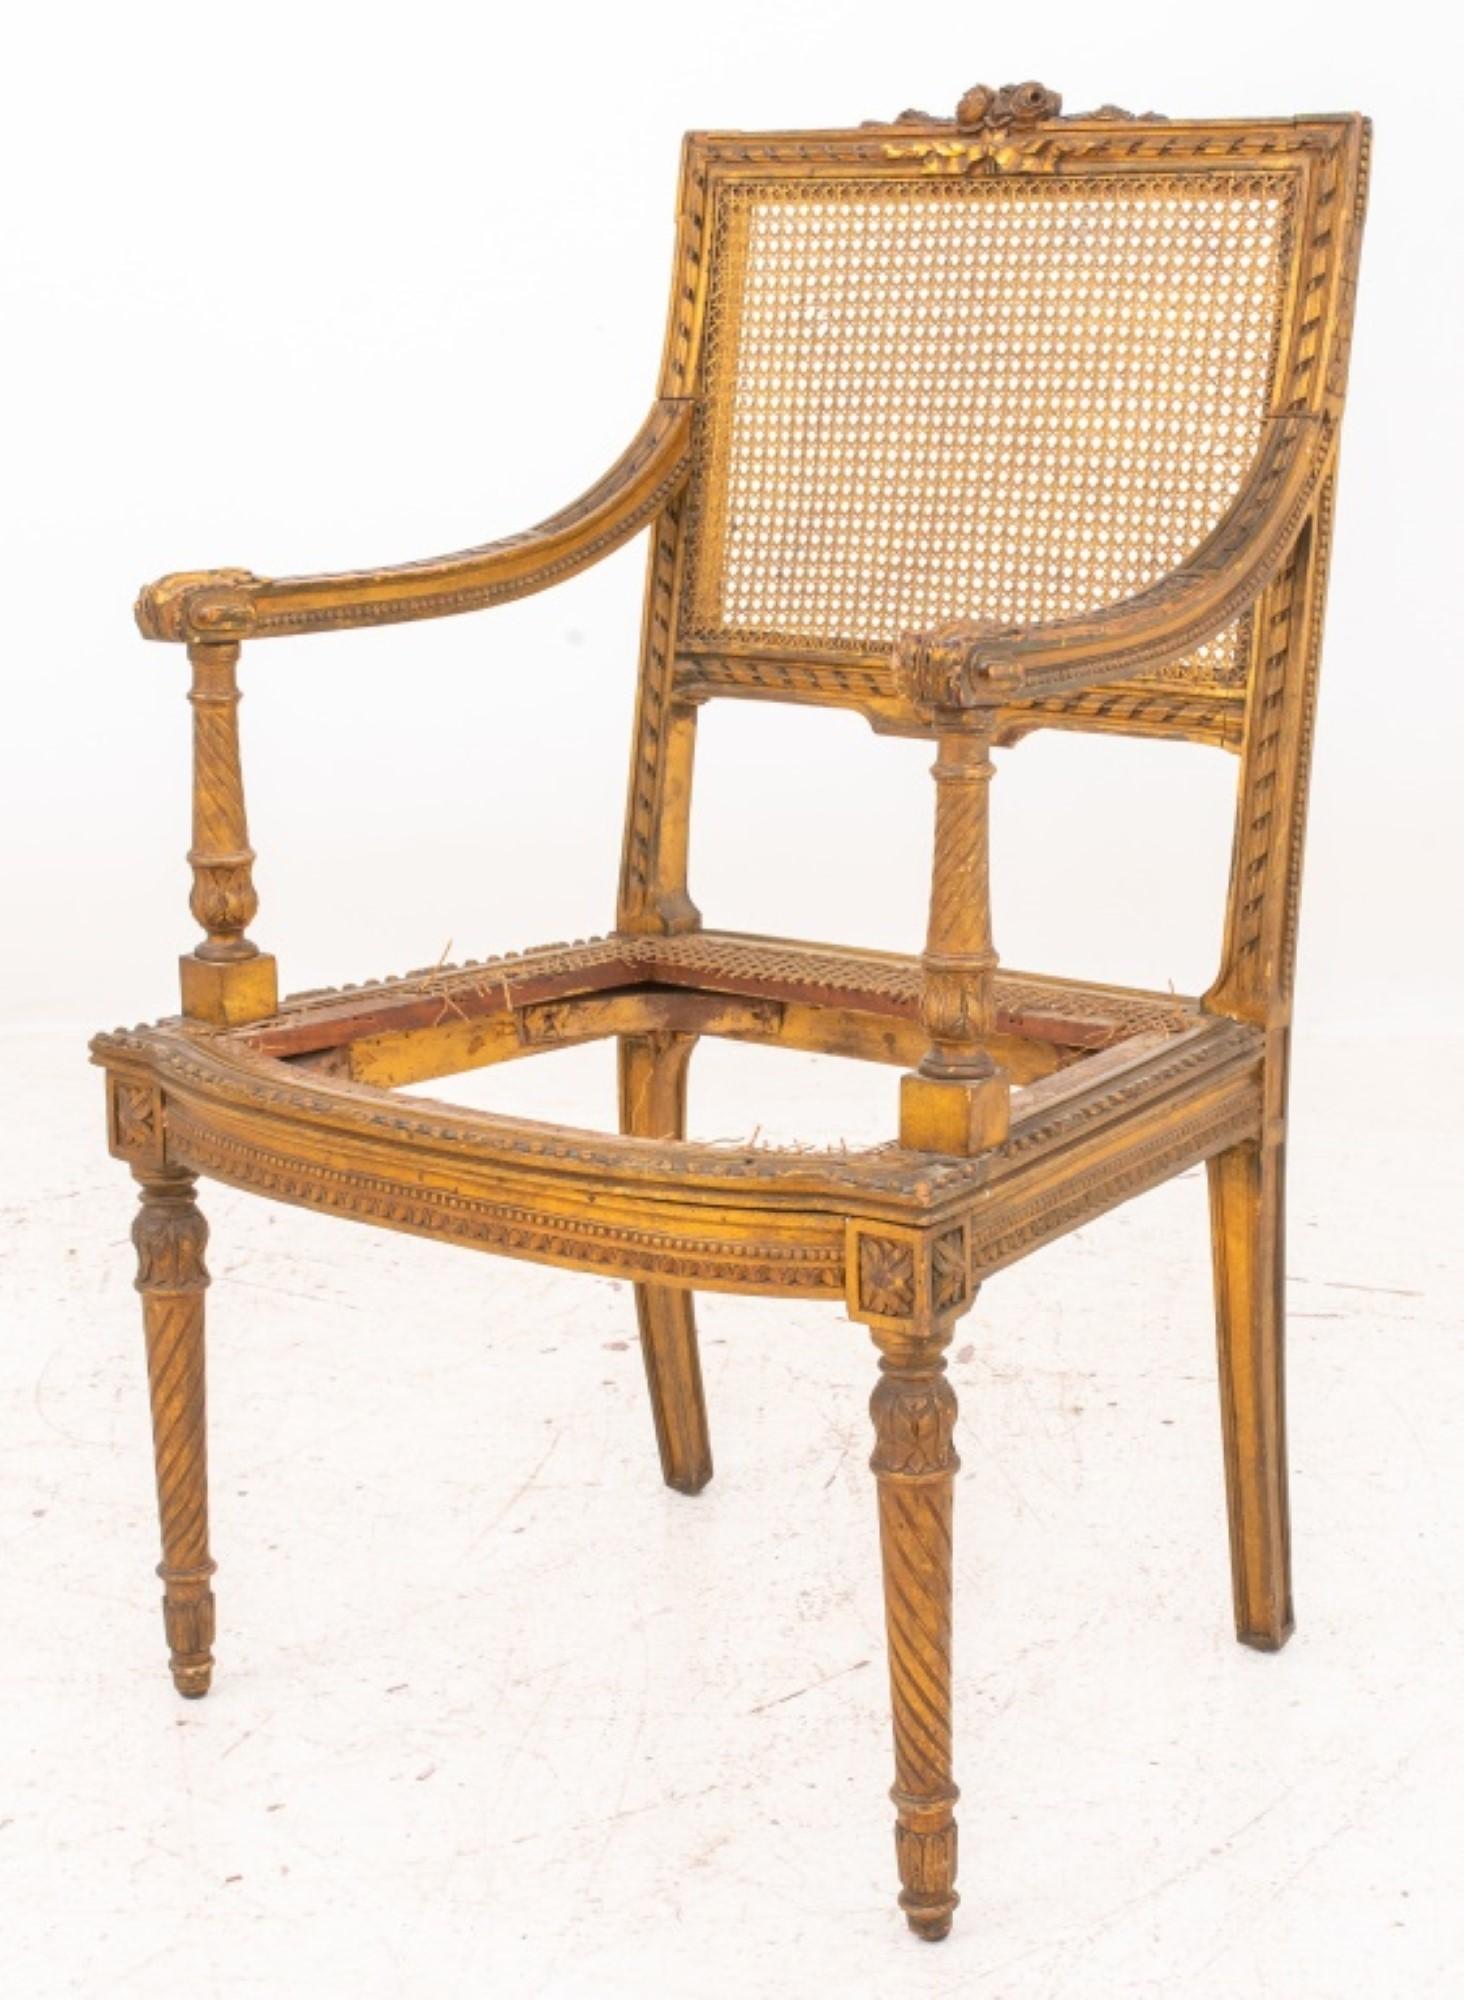 Louis XVI Style Carved Giltwood Armchair 19th C. In Good Condition For Sale In New York, NY